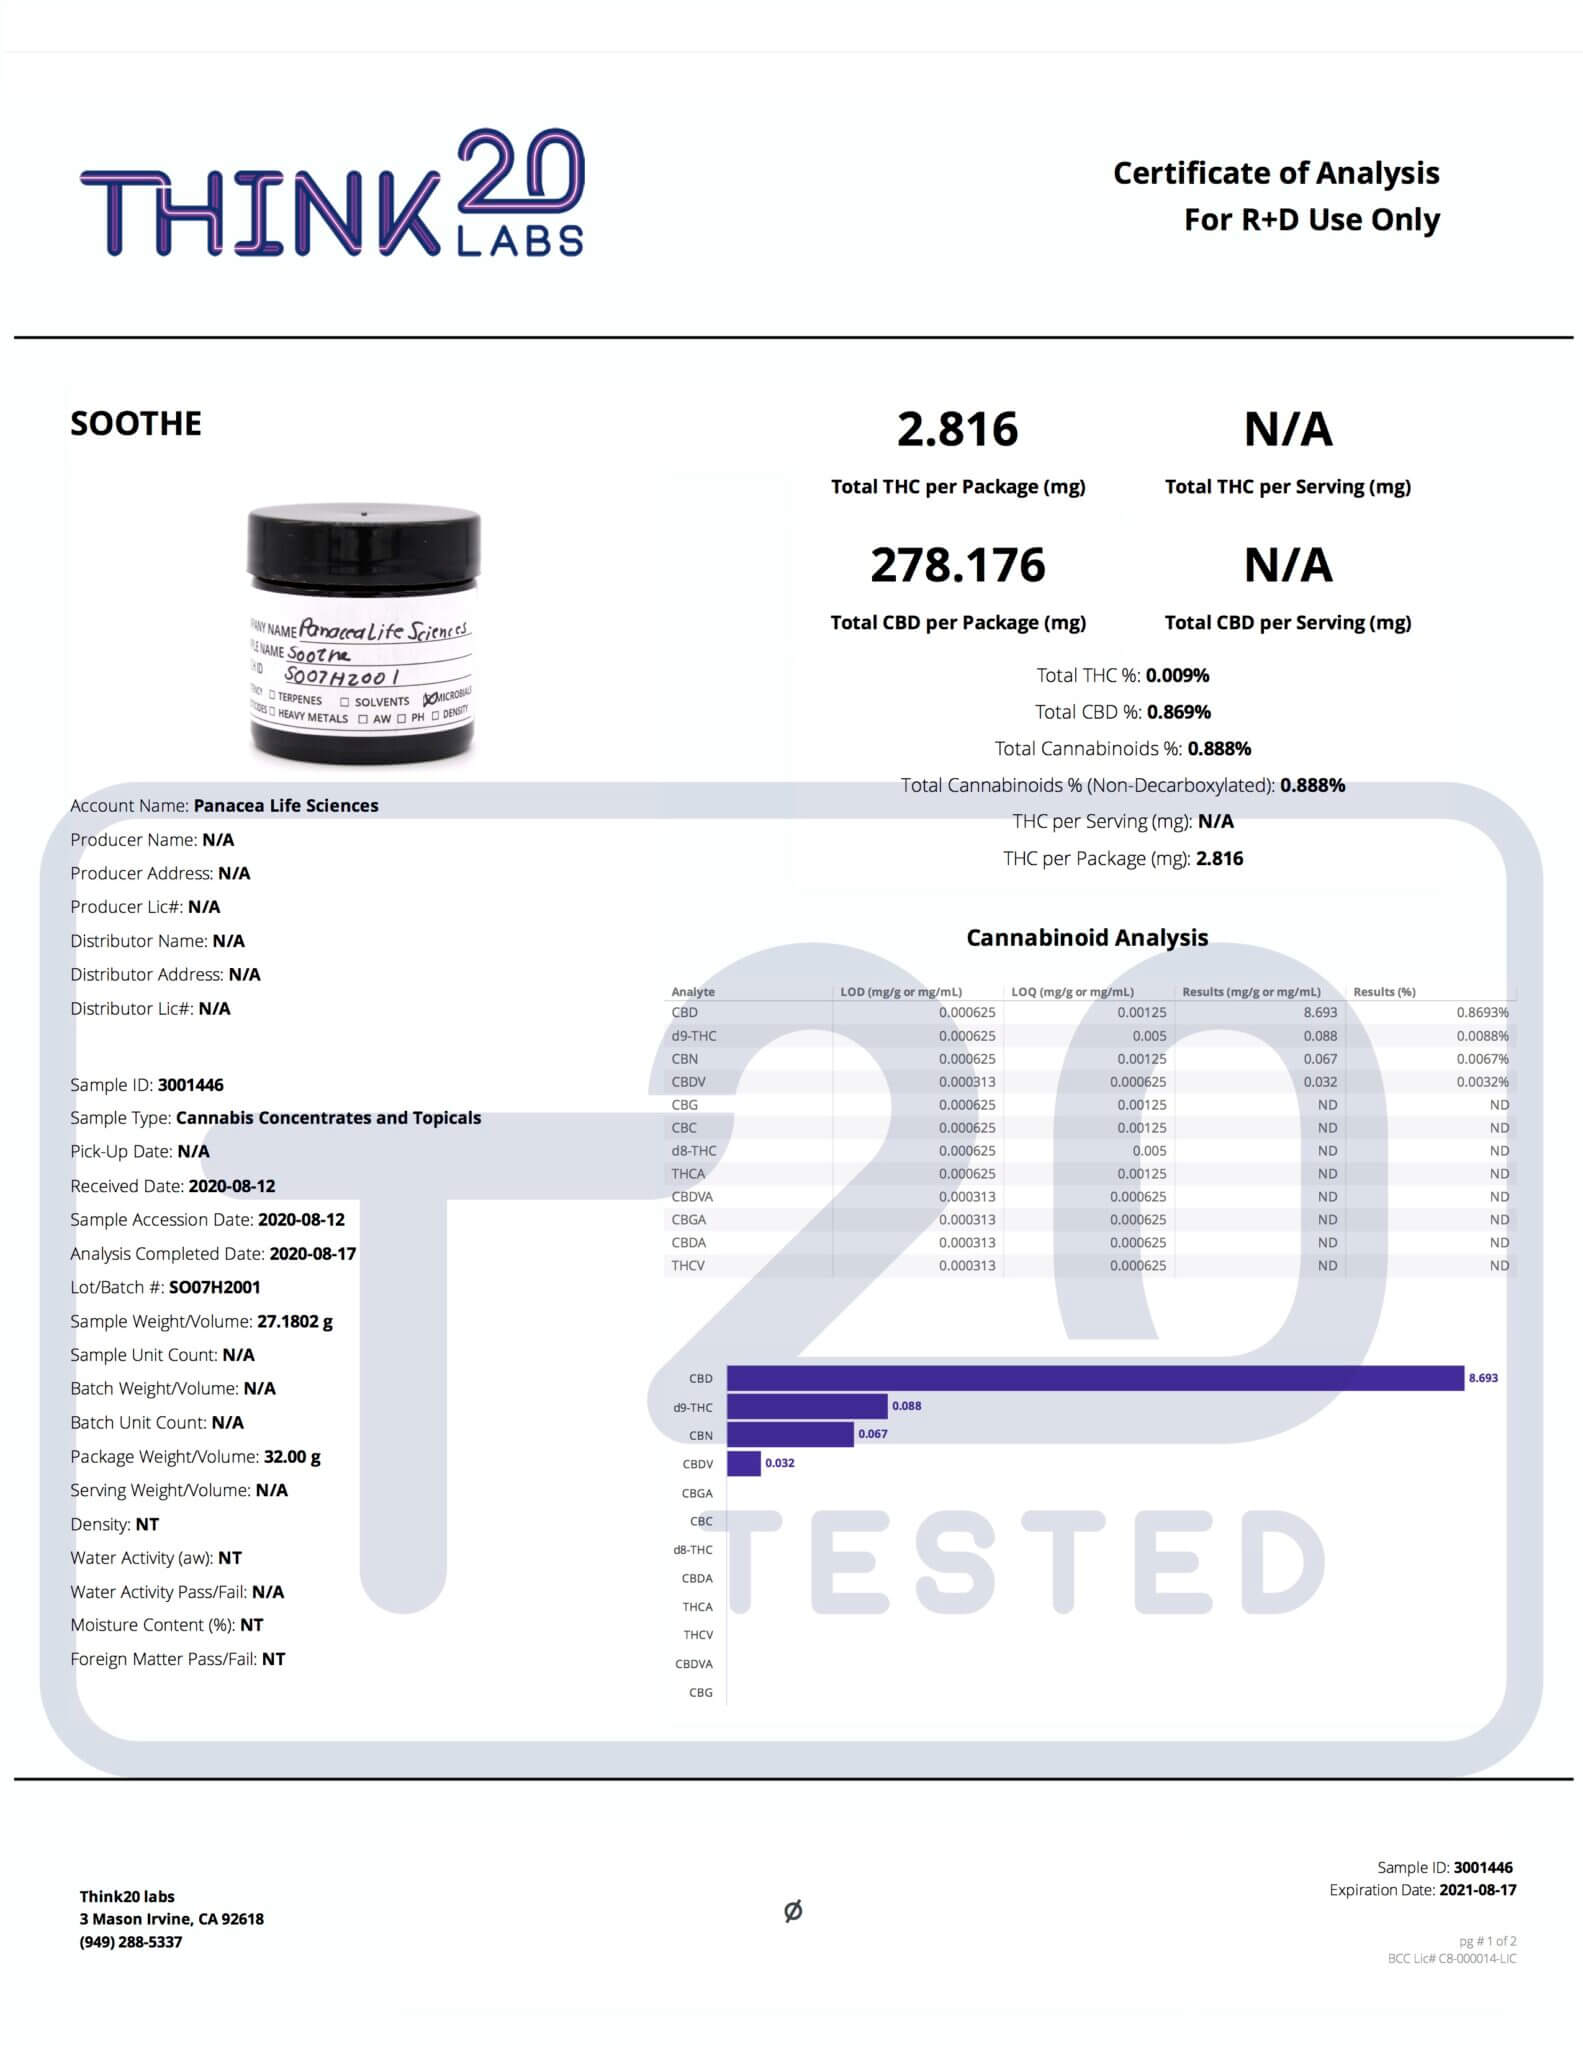 Panacea Test Results - Batch SO07H2001